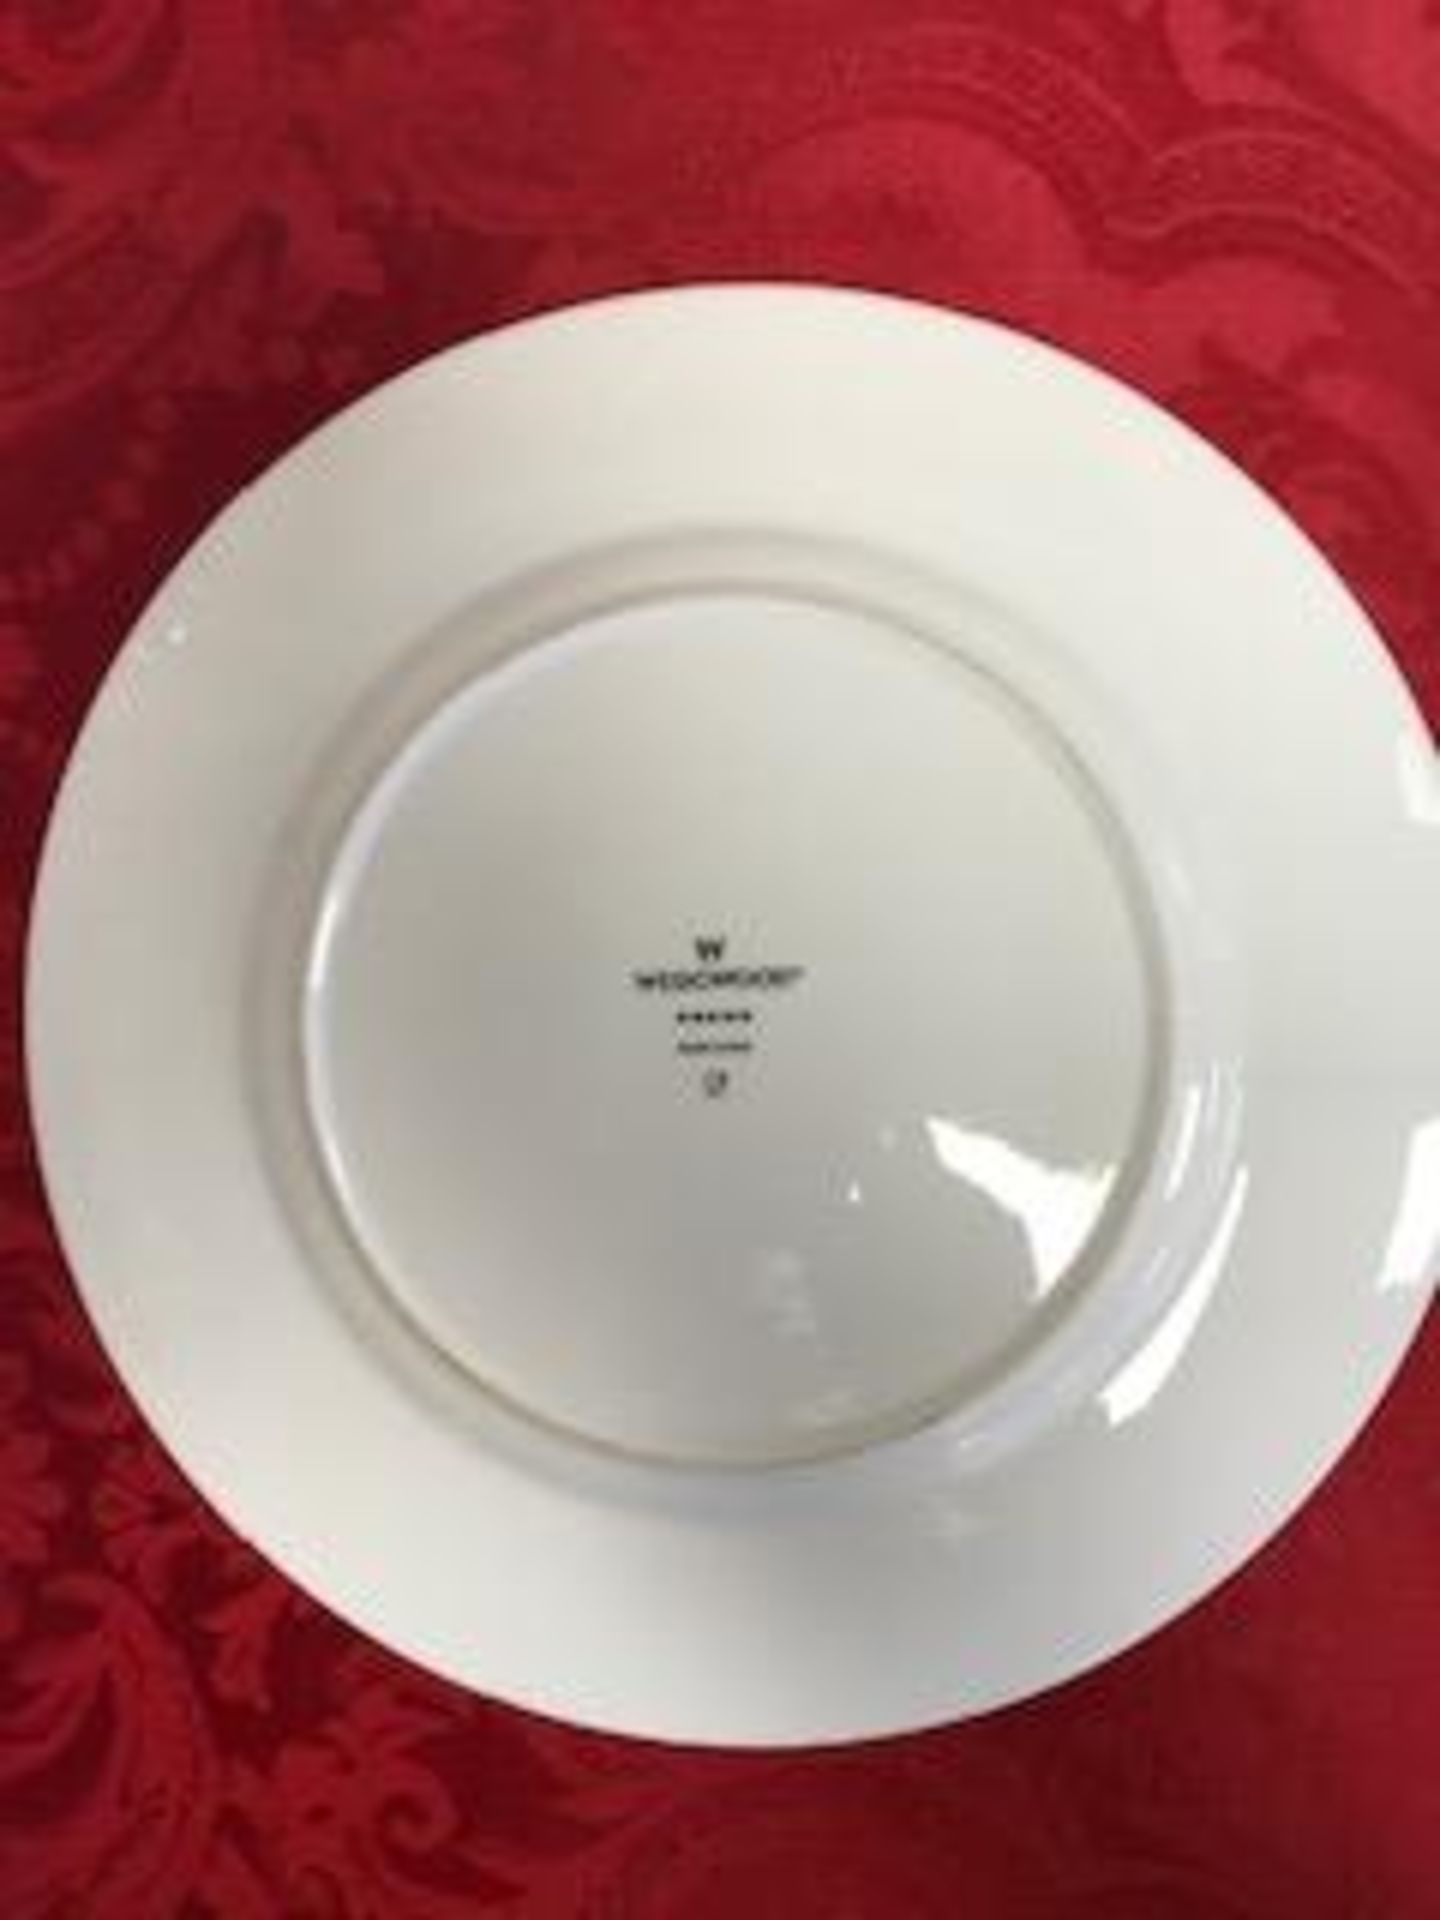 Wedgewood Pure white 10" plate x 50 - Image 2 of 2